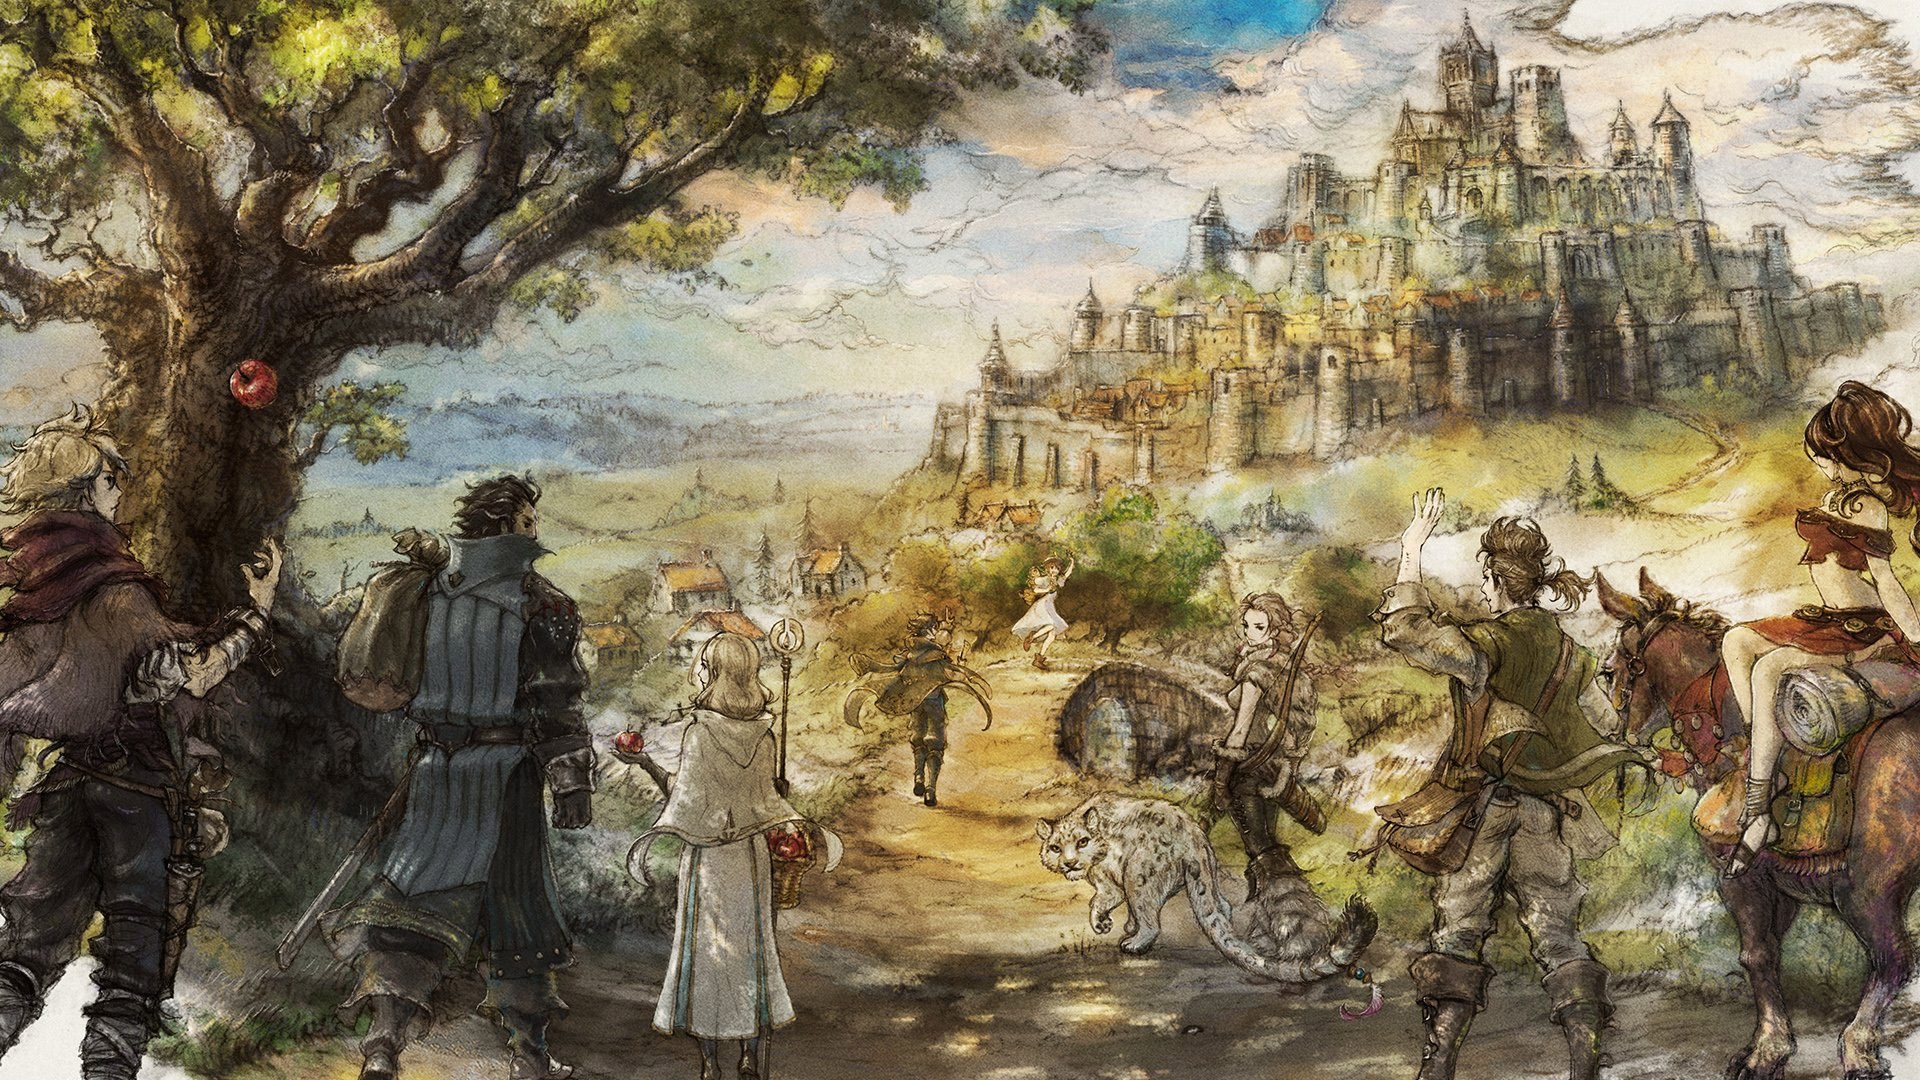 octopath traveller 2 download free